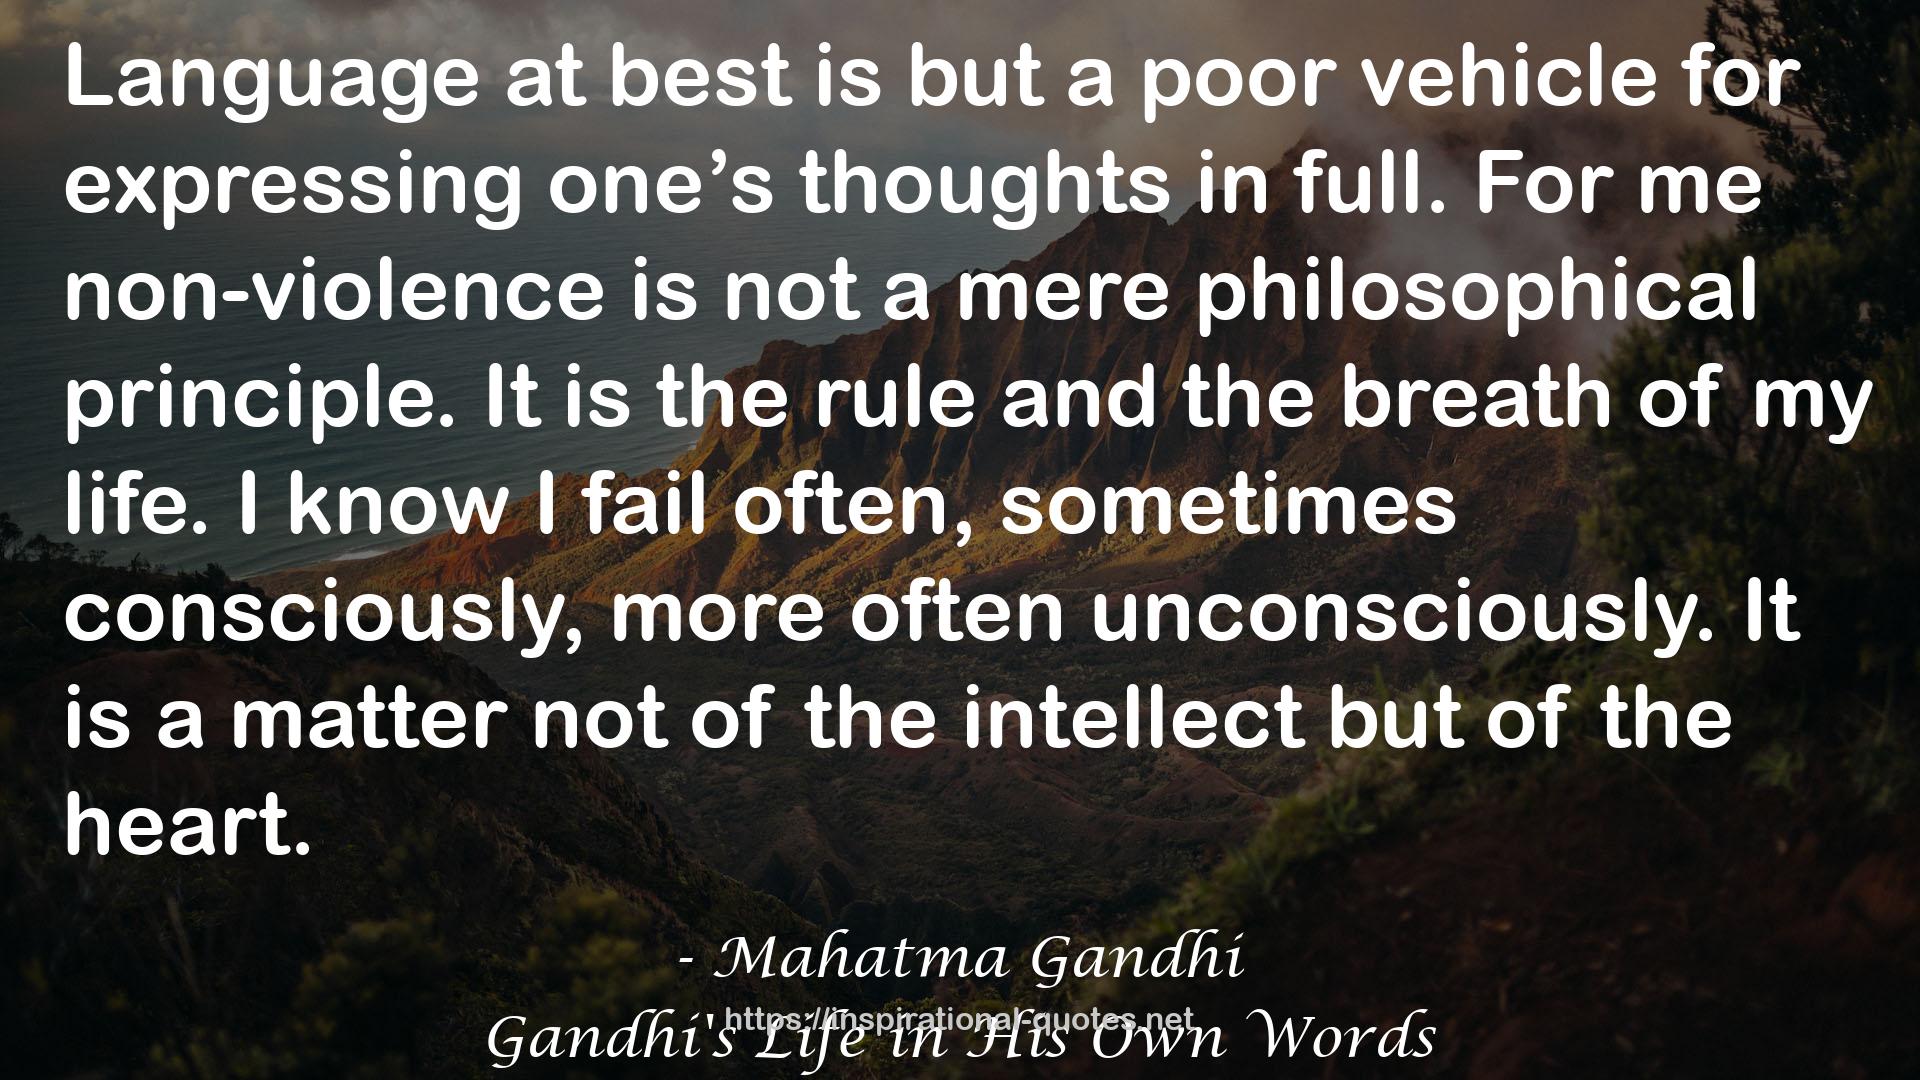 Gandhi's Life in His Own Words QUOTES